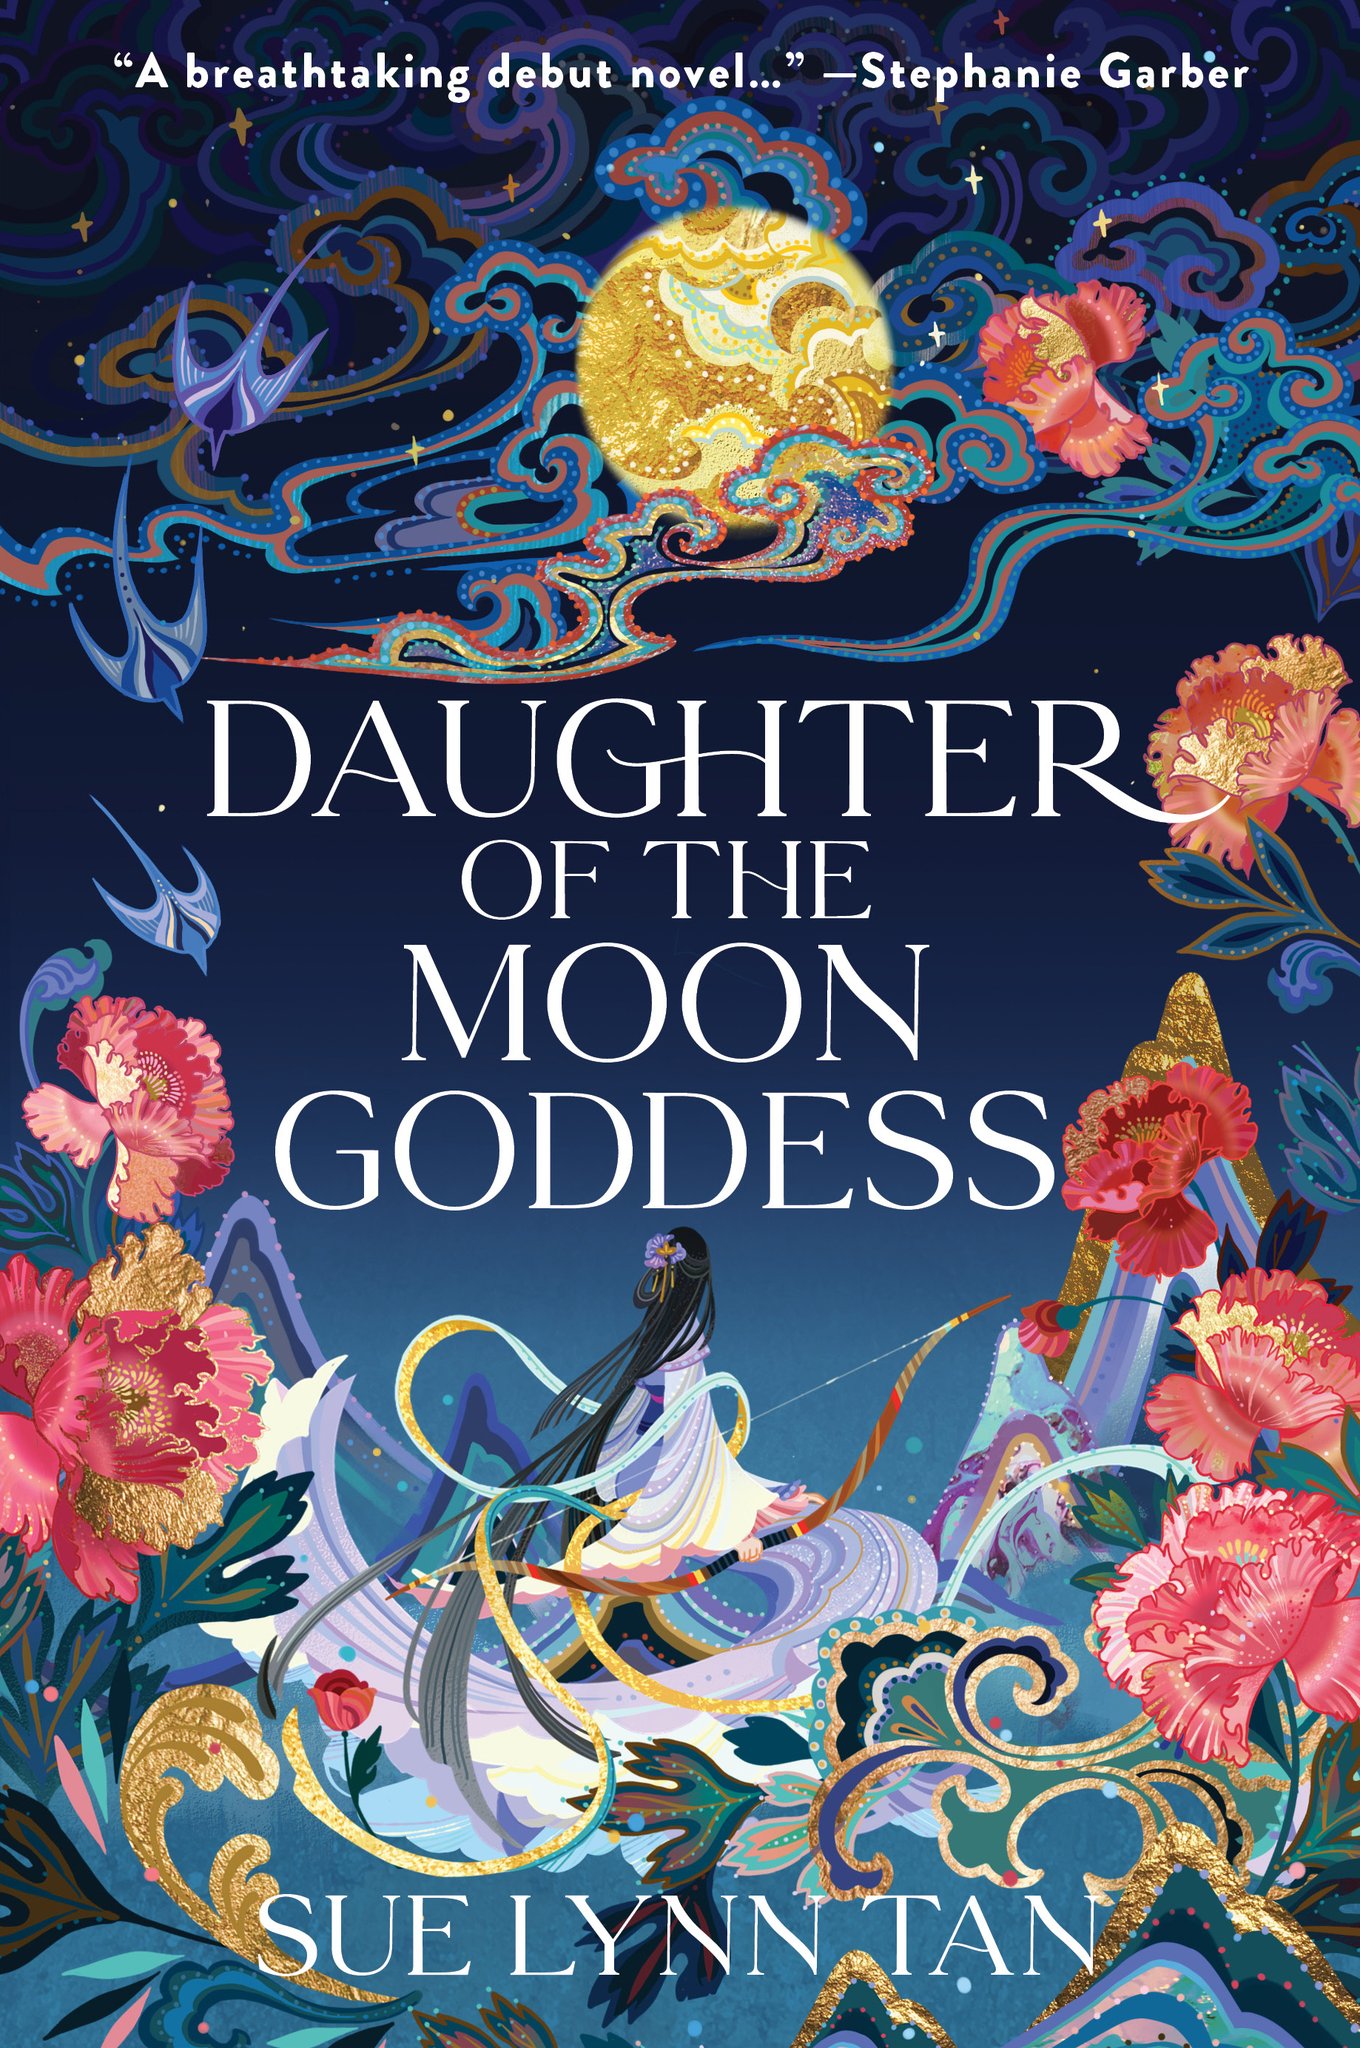 daughter of the moon goddess book cover - part of a set of images for heist squad characters blog post